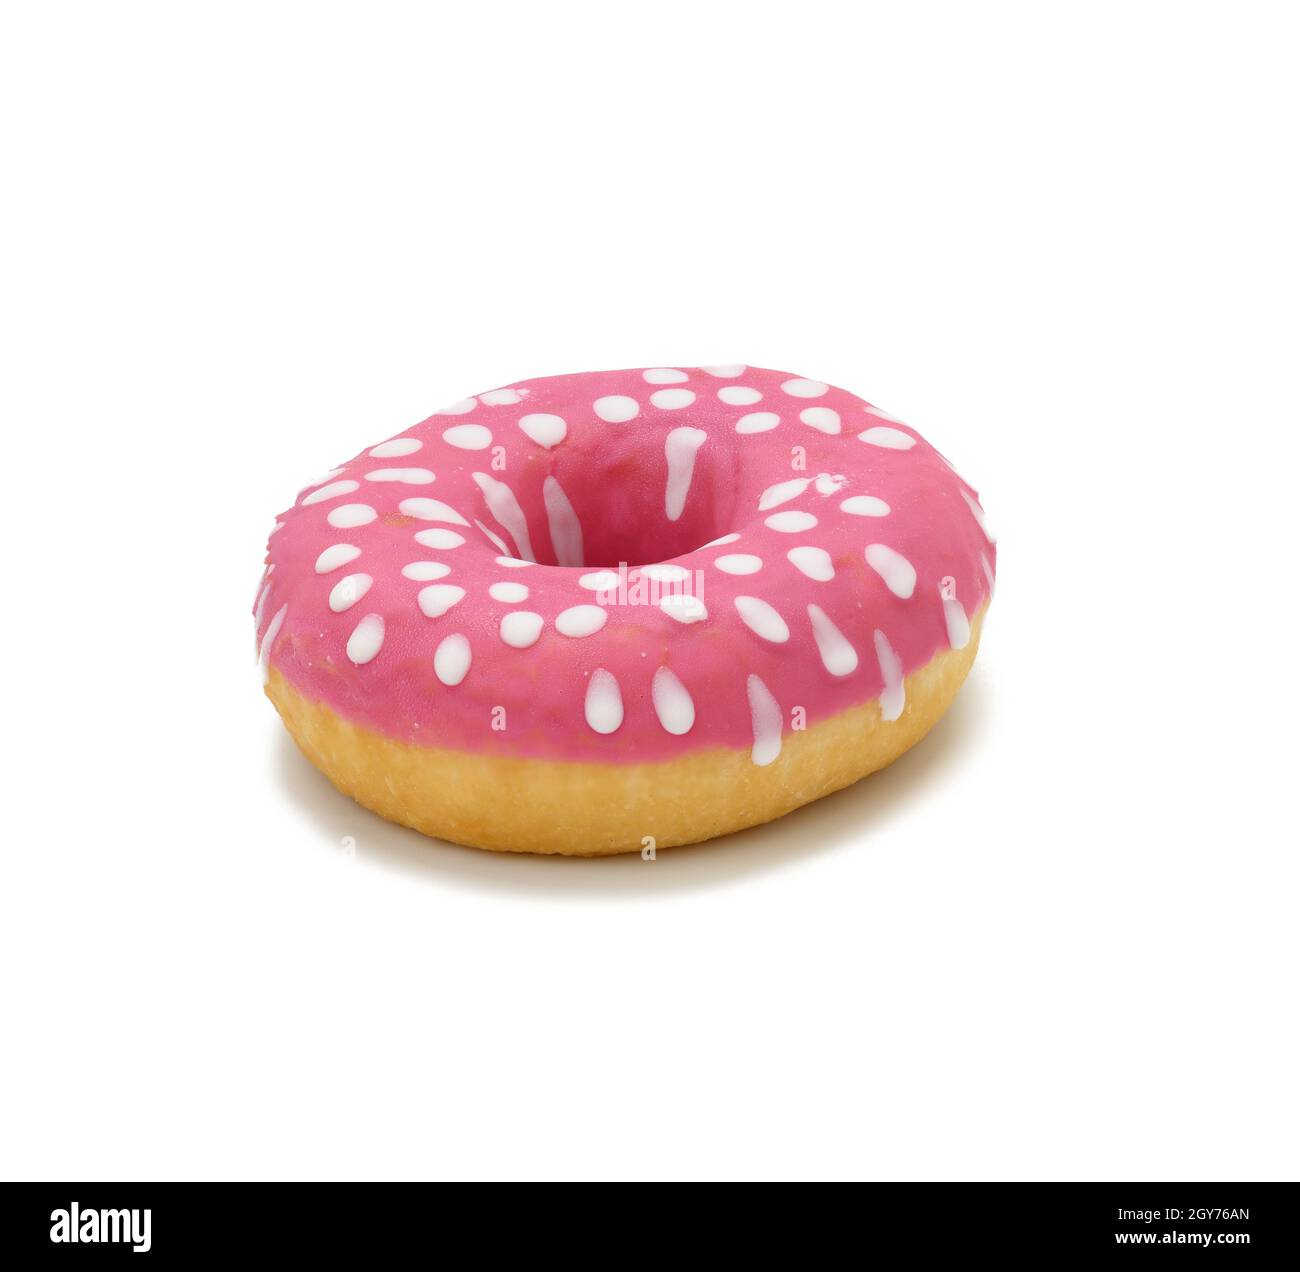 baked round donut with pink icing and white dots isolated on white background, close up Stock Photo